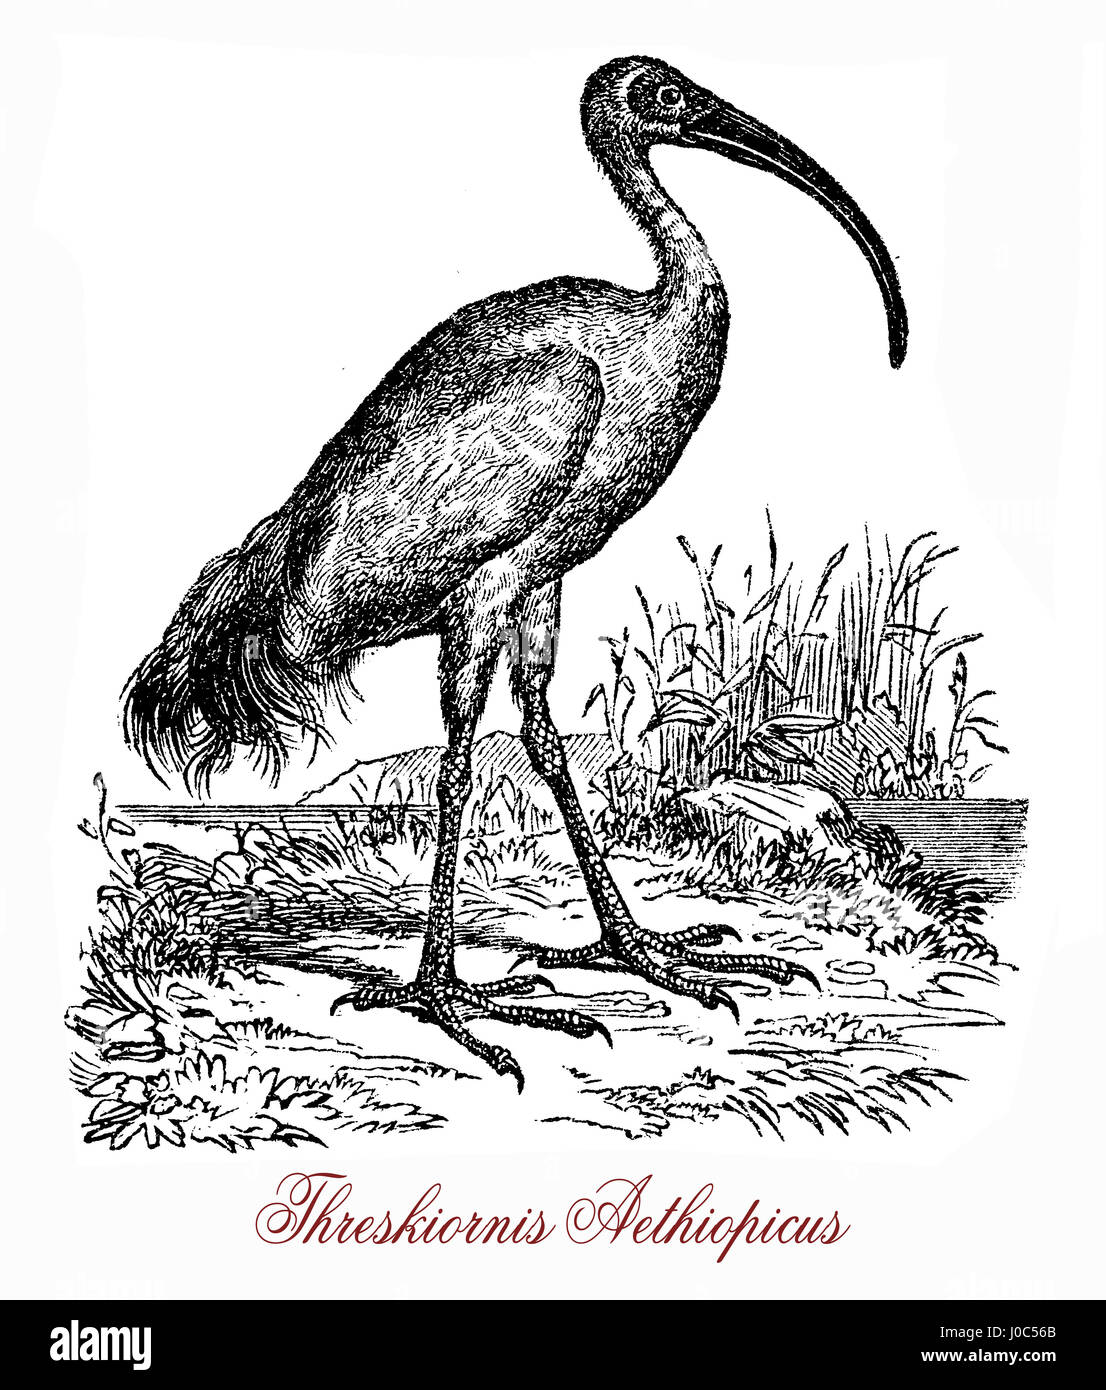 The African sacred ibis (Threskiornis aethiopicus) has a white body plumage apart from dark plumes on the rump and a bald head and neck. The thick curved bill and legs are black. It was regarded as sacred in Egypt, where it was venerated and often mummified as a symbol of the god Thoth. Stock Photo